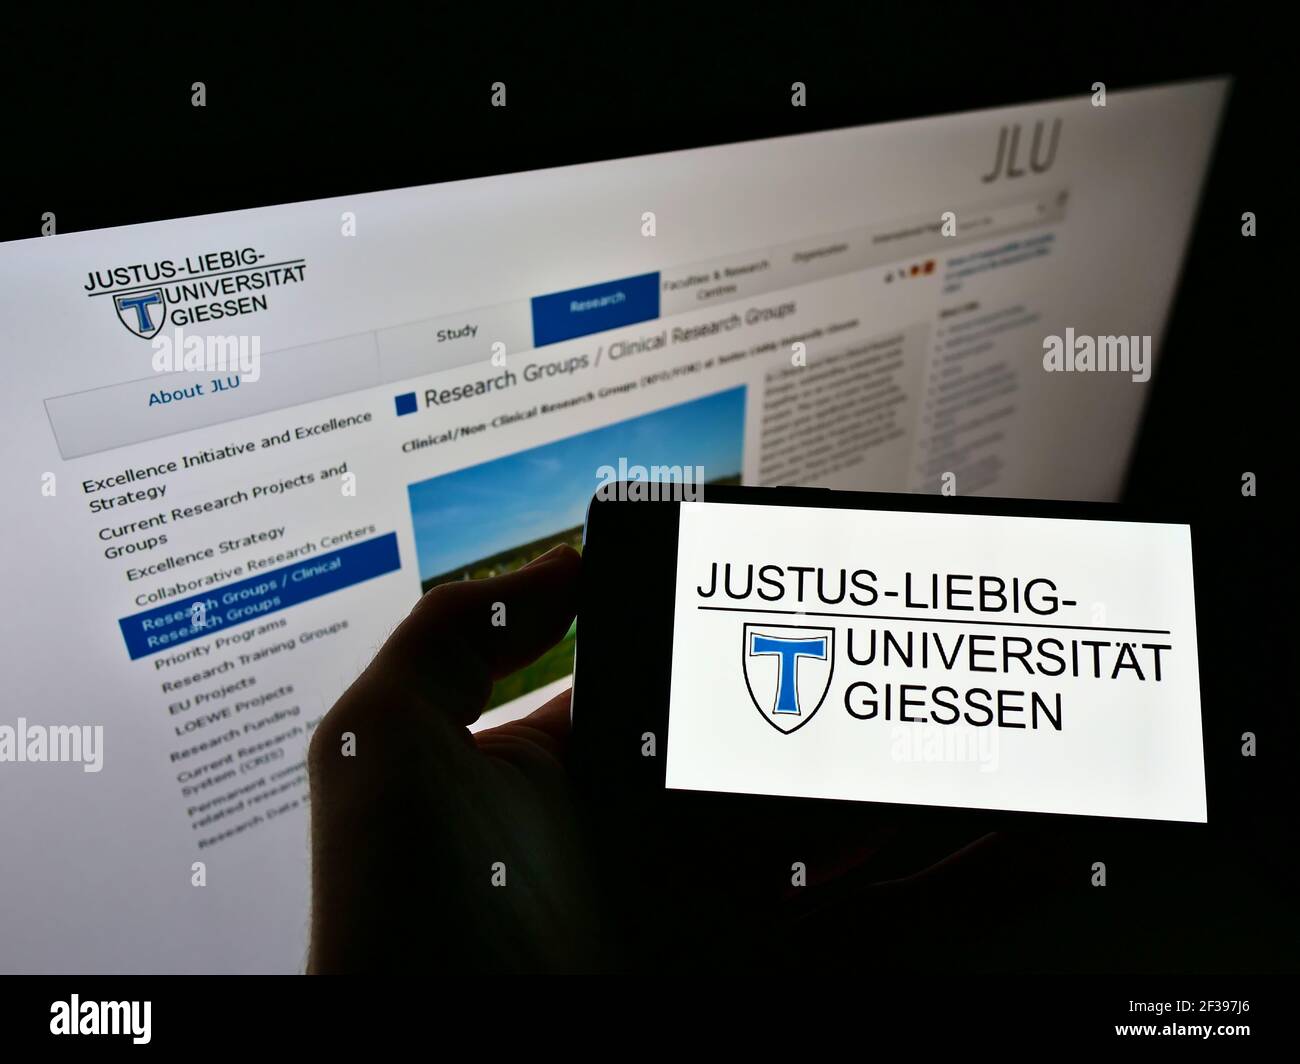 Person holding smartphone with logo of German university Justus-Liebig-Universität Gießen on screen in front of website. Focus on phone display. Stock Photo